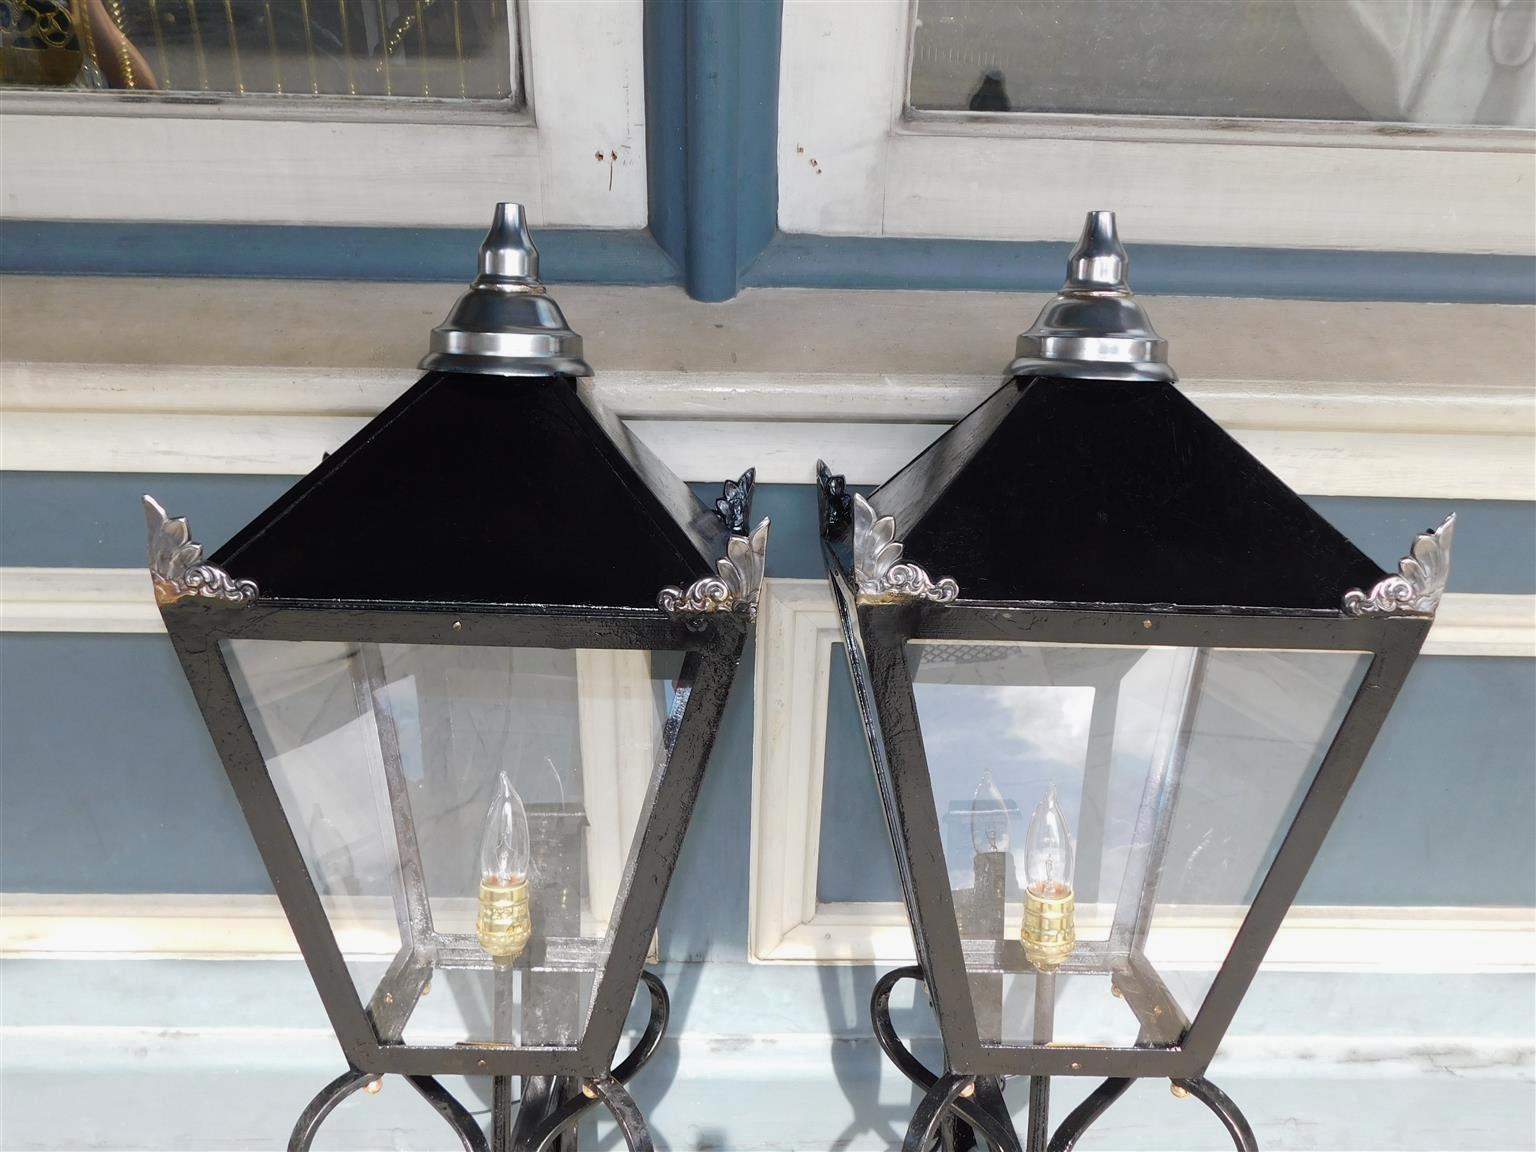 Pair of American Wrought Iron and Spelter Finial Mounted Wall Lanterns, C. 1850 In Excellent Condition For Sale In Hollywood, SC